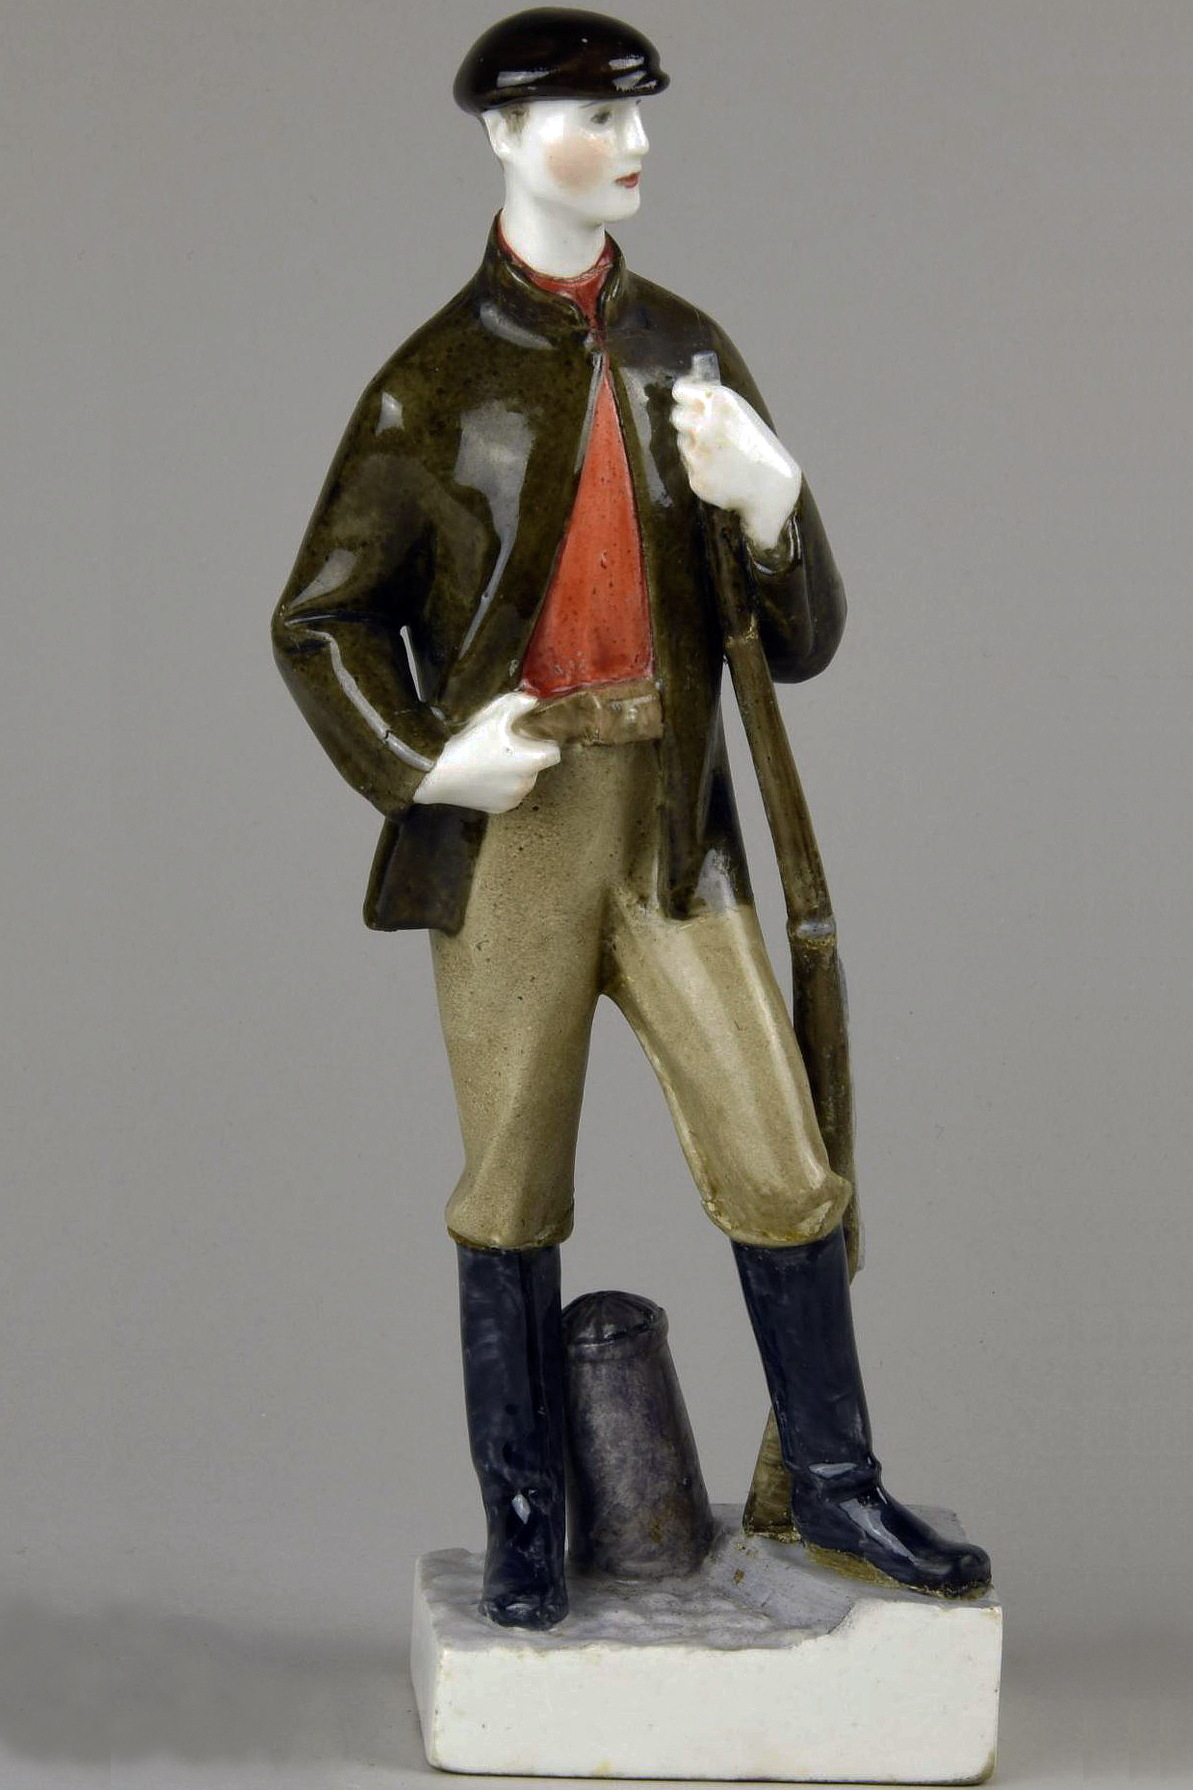 Soviet porcelain figure of Red Army Soldier "Красногвардеец" with the rifle by Vasily Kuznetsov